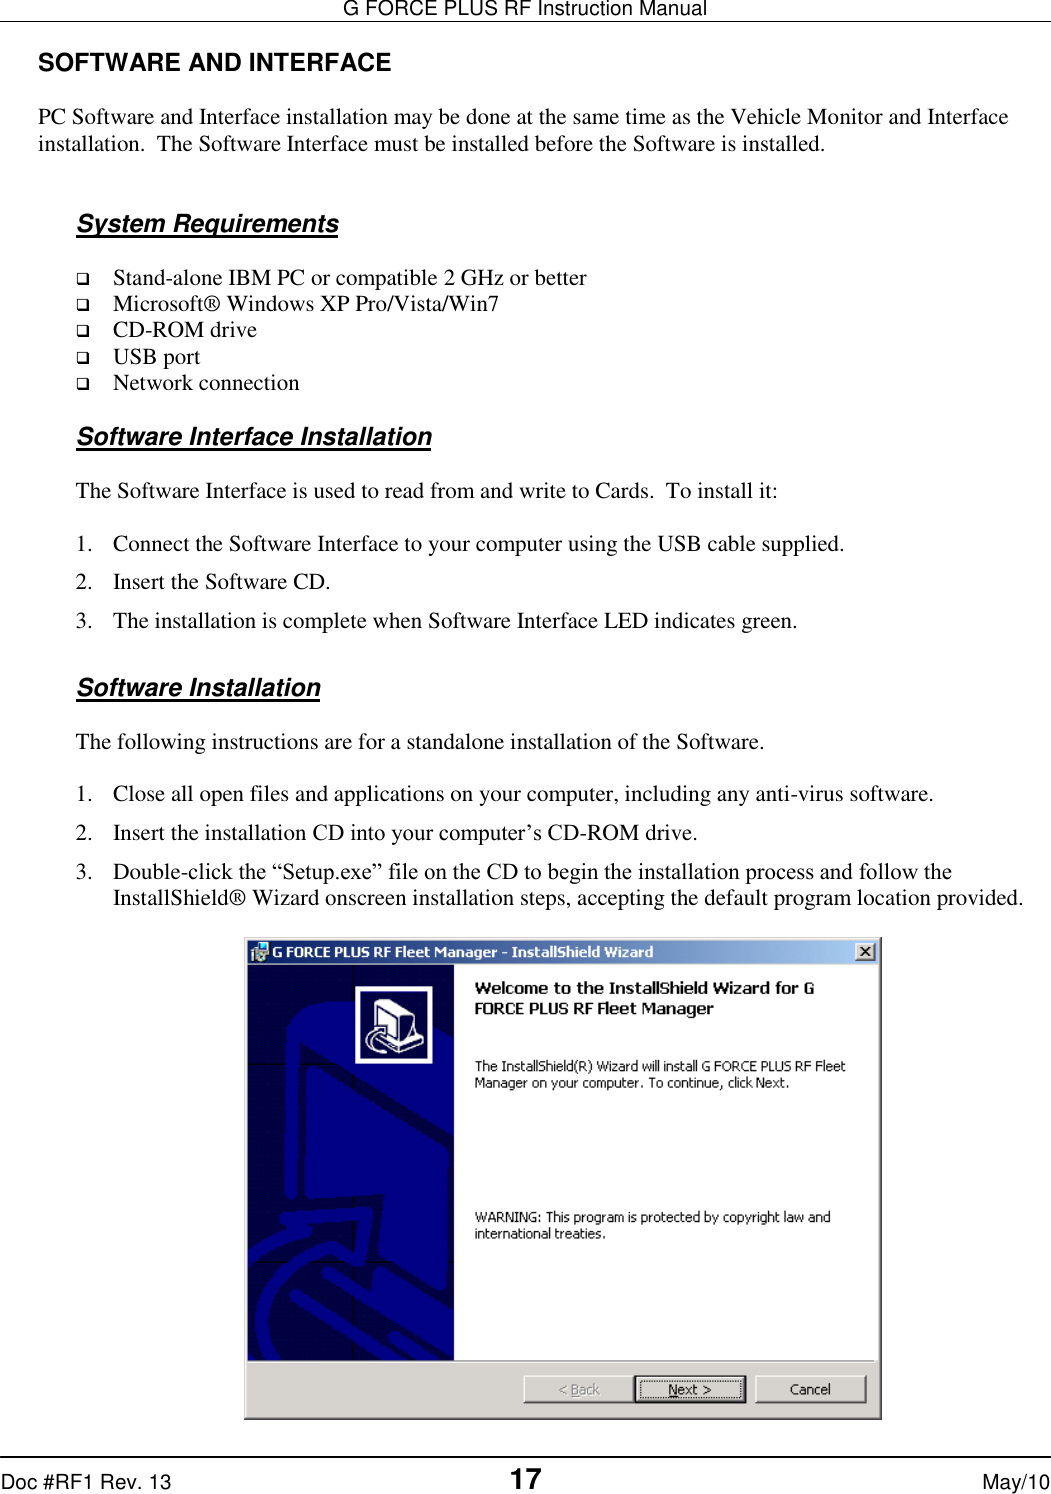 G FORCE PLUS RF Instruction Manual   Doc #RF1 Rev. 13  17 May/10 SOFTWARE AND INTERFACE  PC Software and Interface installation may be done at the same time as the Vehicle Monitor and Interface installation.  The Software Interface must be installed before the Software is installed.   System Requirements   Stand-alone IBM PC or compatible 2 GHz or better  Microsoft® Windows XP Pro/Vista/Win7  CD-ROM drive  USB port  Network connection  Software Interface Installation  The Software Interface is used to read from and write to Cards.  To install it:  1. Connect the Software Interface to your computer using the USB cable supplied. 2. Insert the Software CD. 3. The installation is complete when Software Interface LED indicates green.  Software Installation  The following instructions are for a standalone installation of the Software.  1. Close all open files and applications on your computer, including any anti-virus software. 2. Insert the installation CD into your computer’s CD-ROM drive. 3. Double-click the “Setup.exe” file on the CD to begin the installation process and follow the InstallShield® Wizard onscreen installation steps, accepting the default program location provided.   